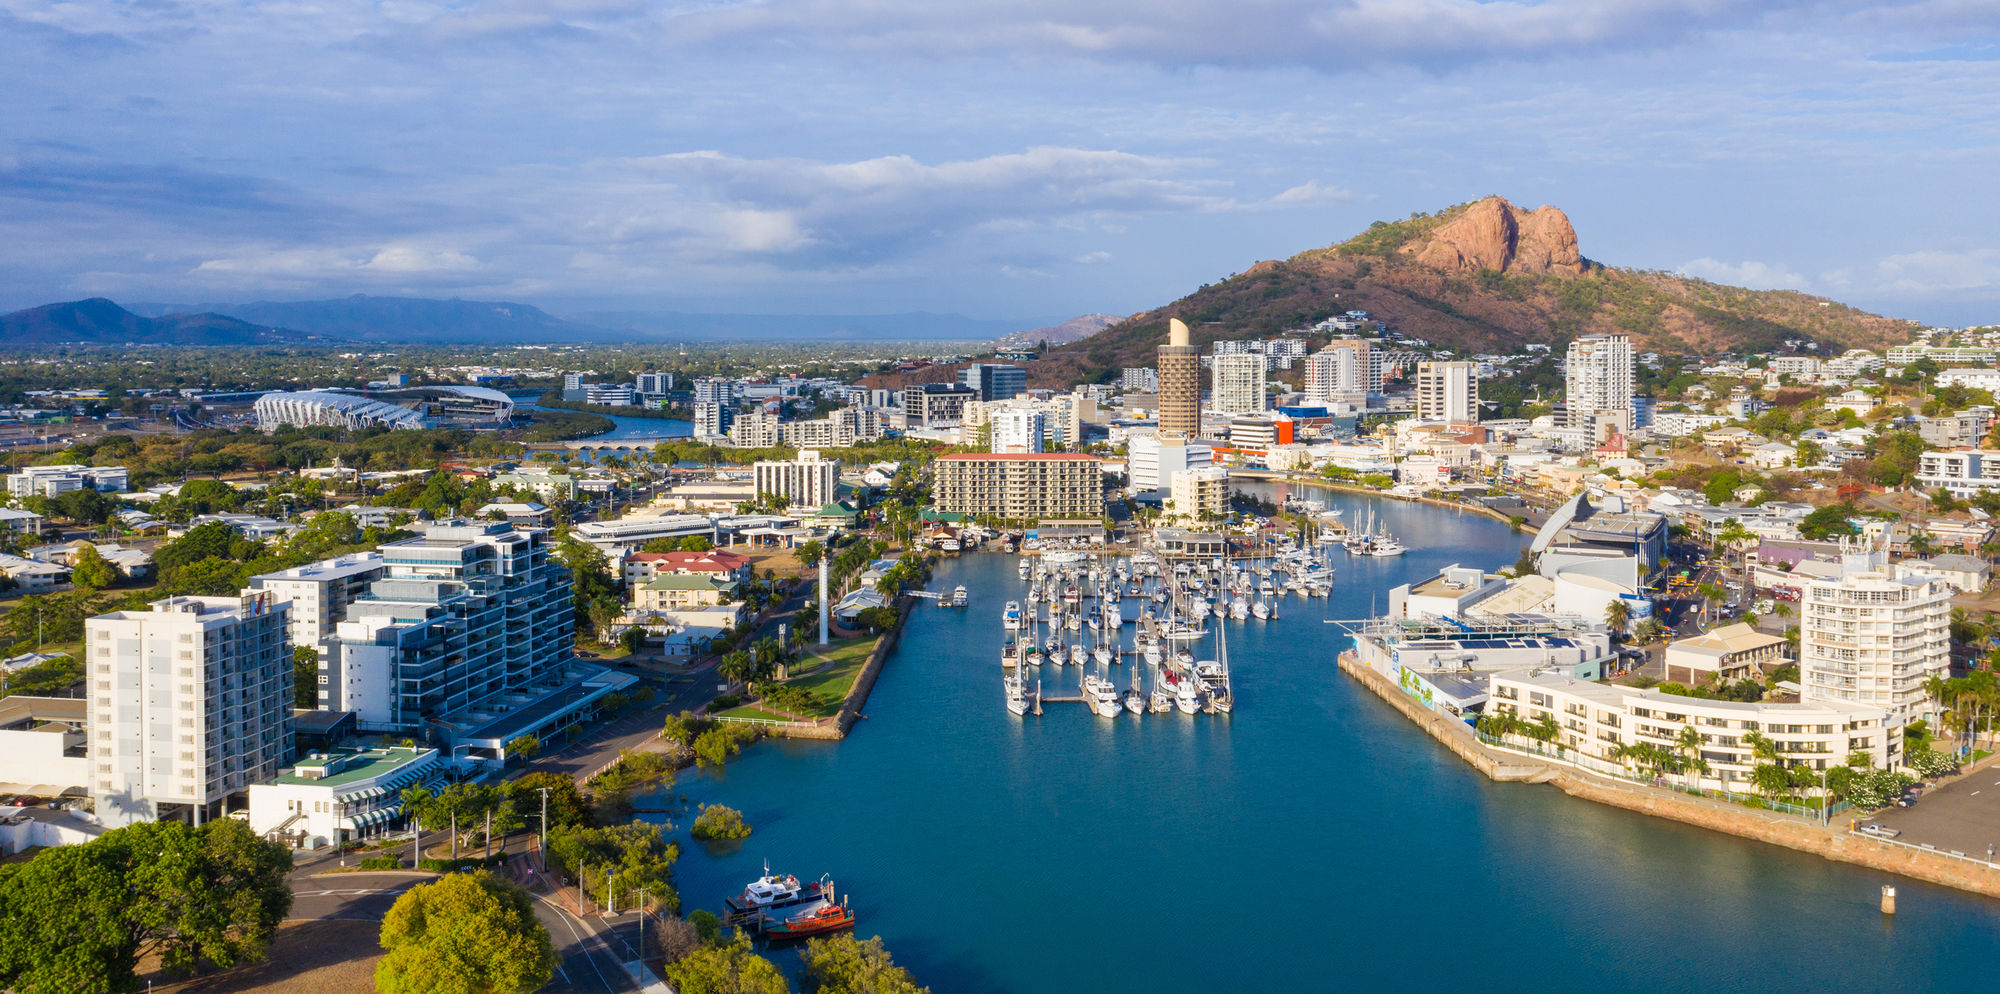 Townsville   GettyImages 11918108020 W1920 W2000 